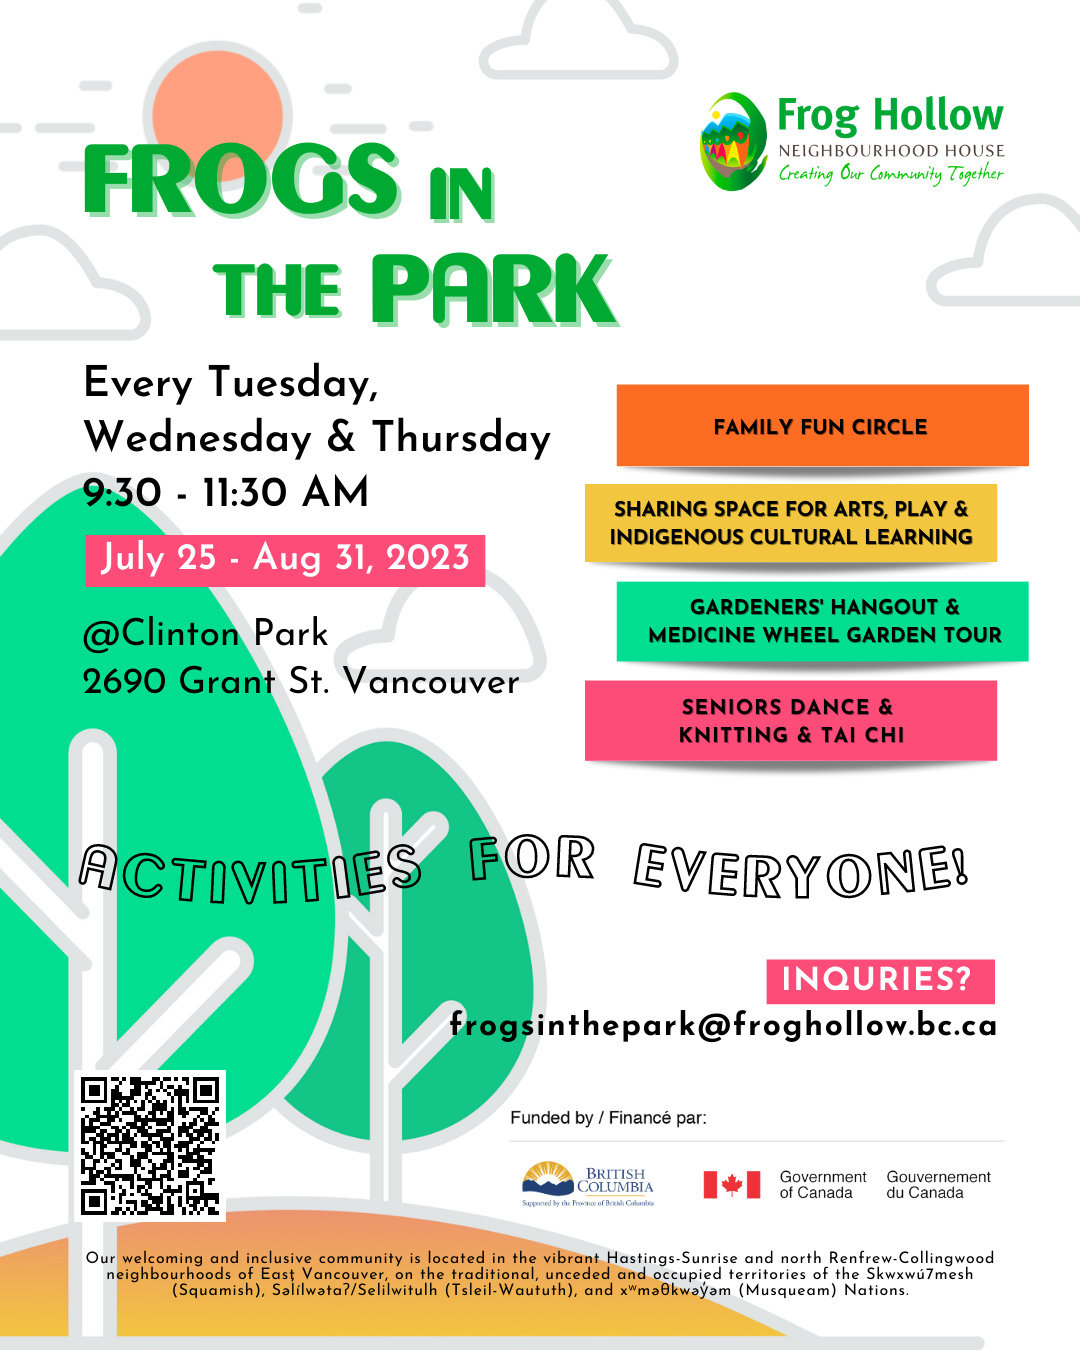 Frogs-in-the-Park